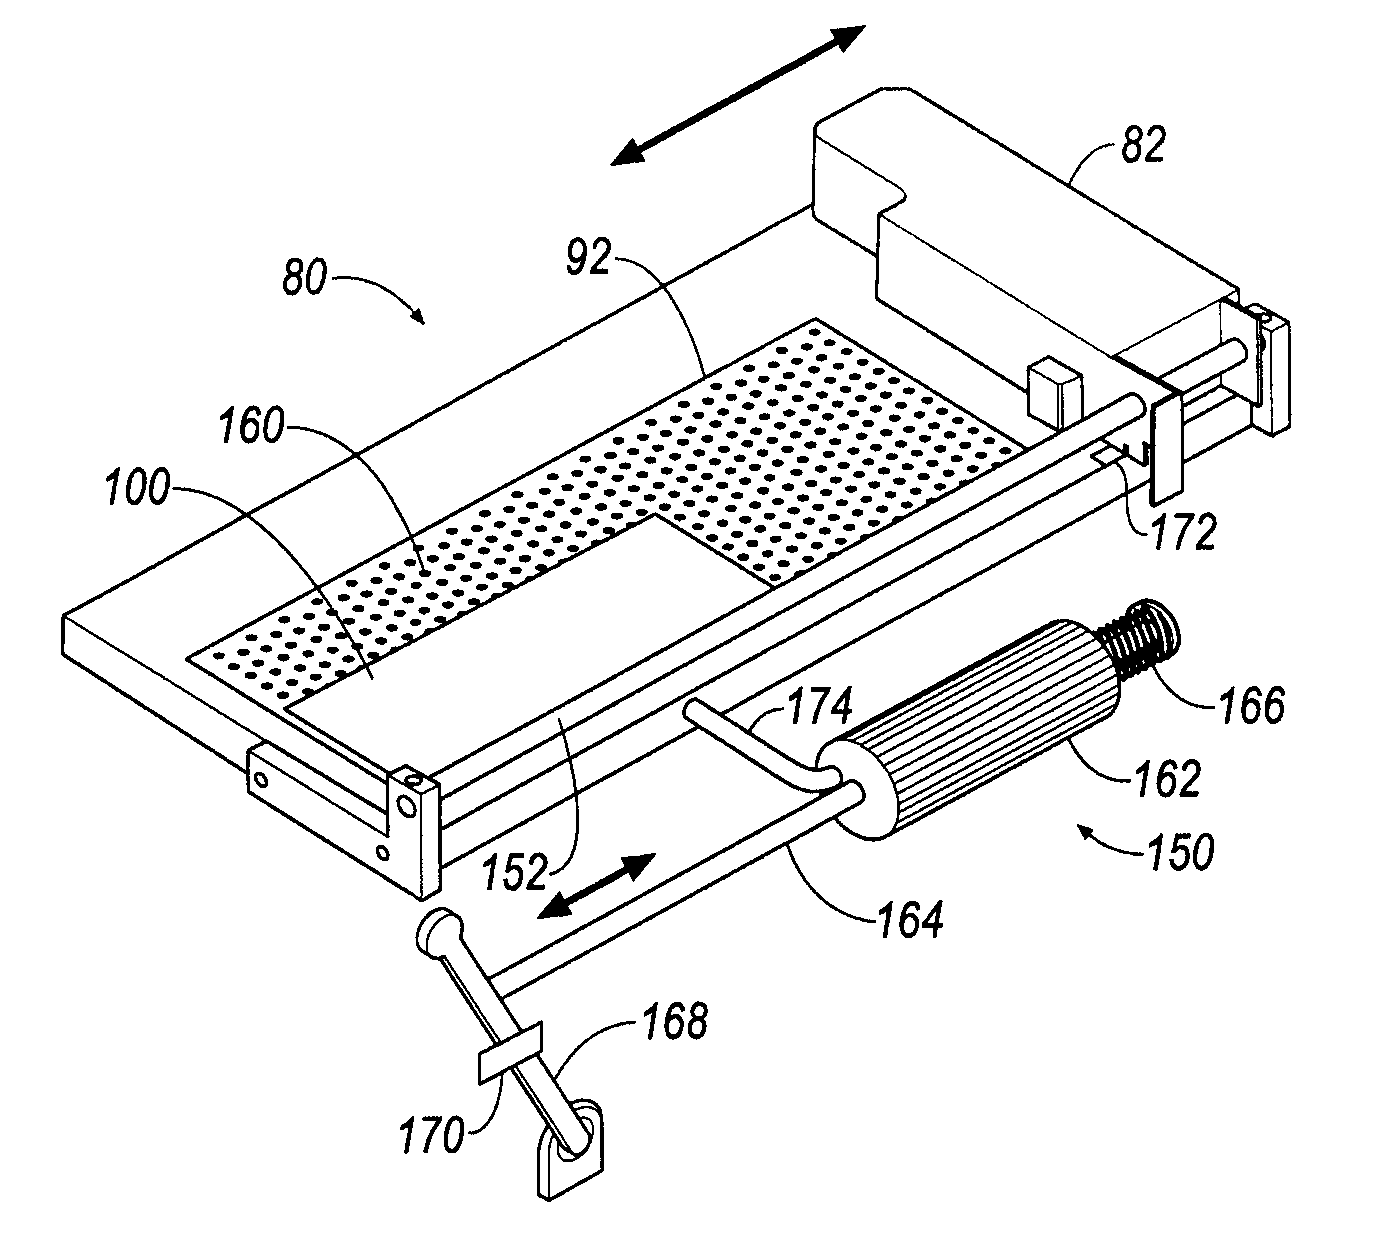 Hand-operated document reader/imager with document retention device including manually-powered anti-skew methodology